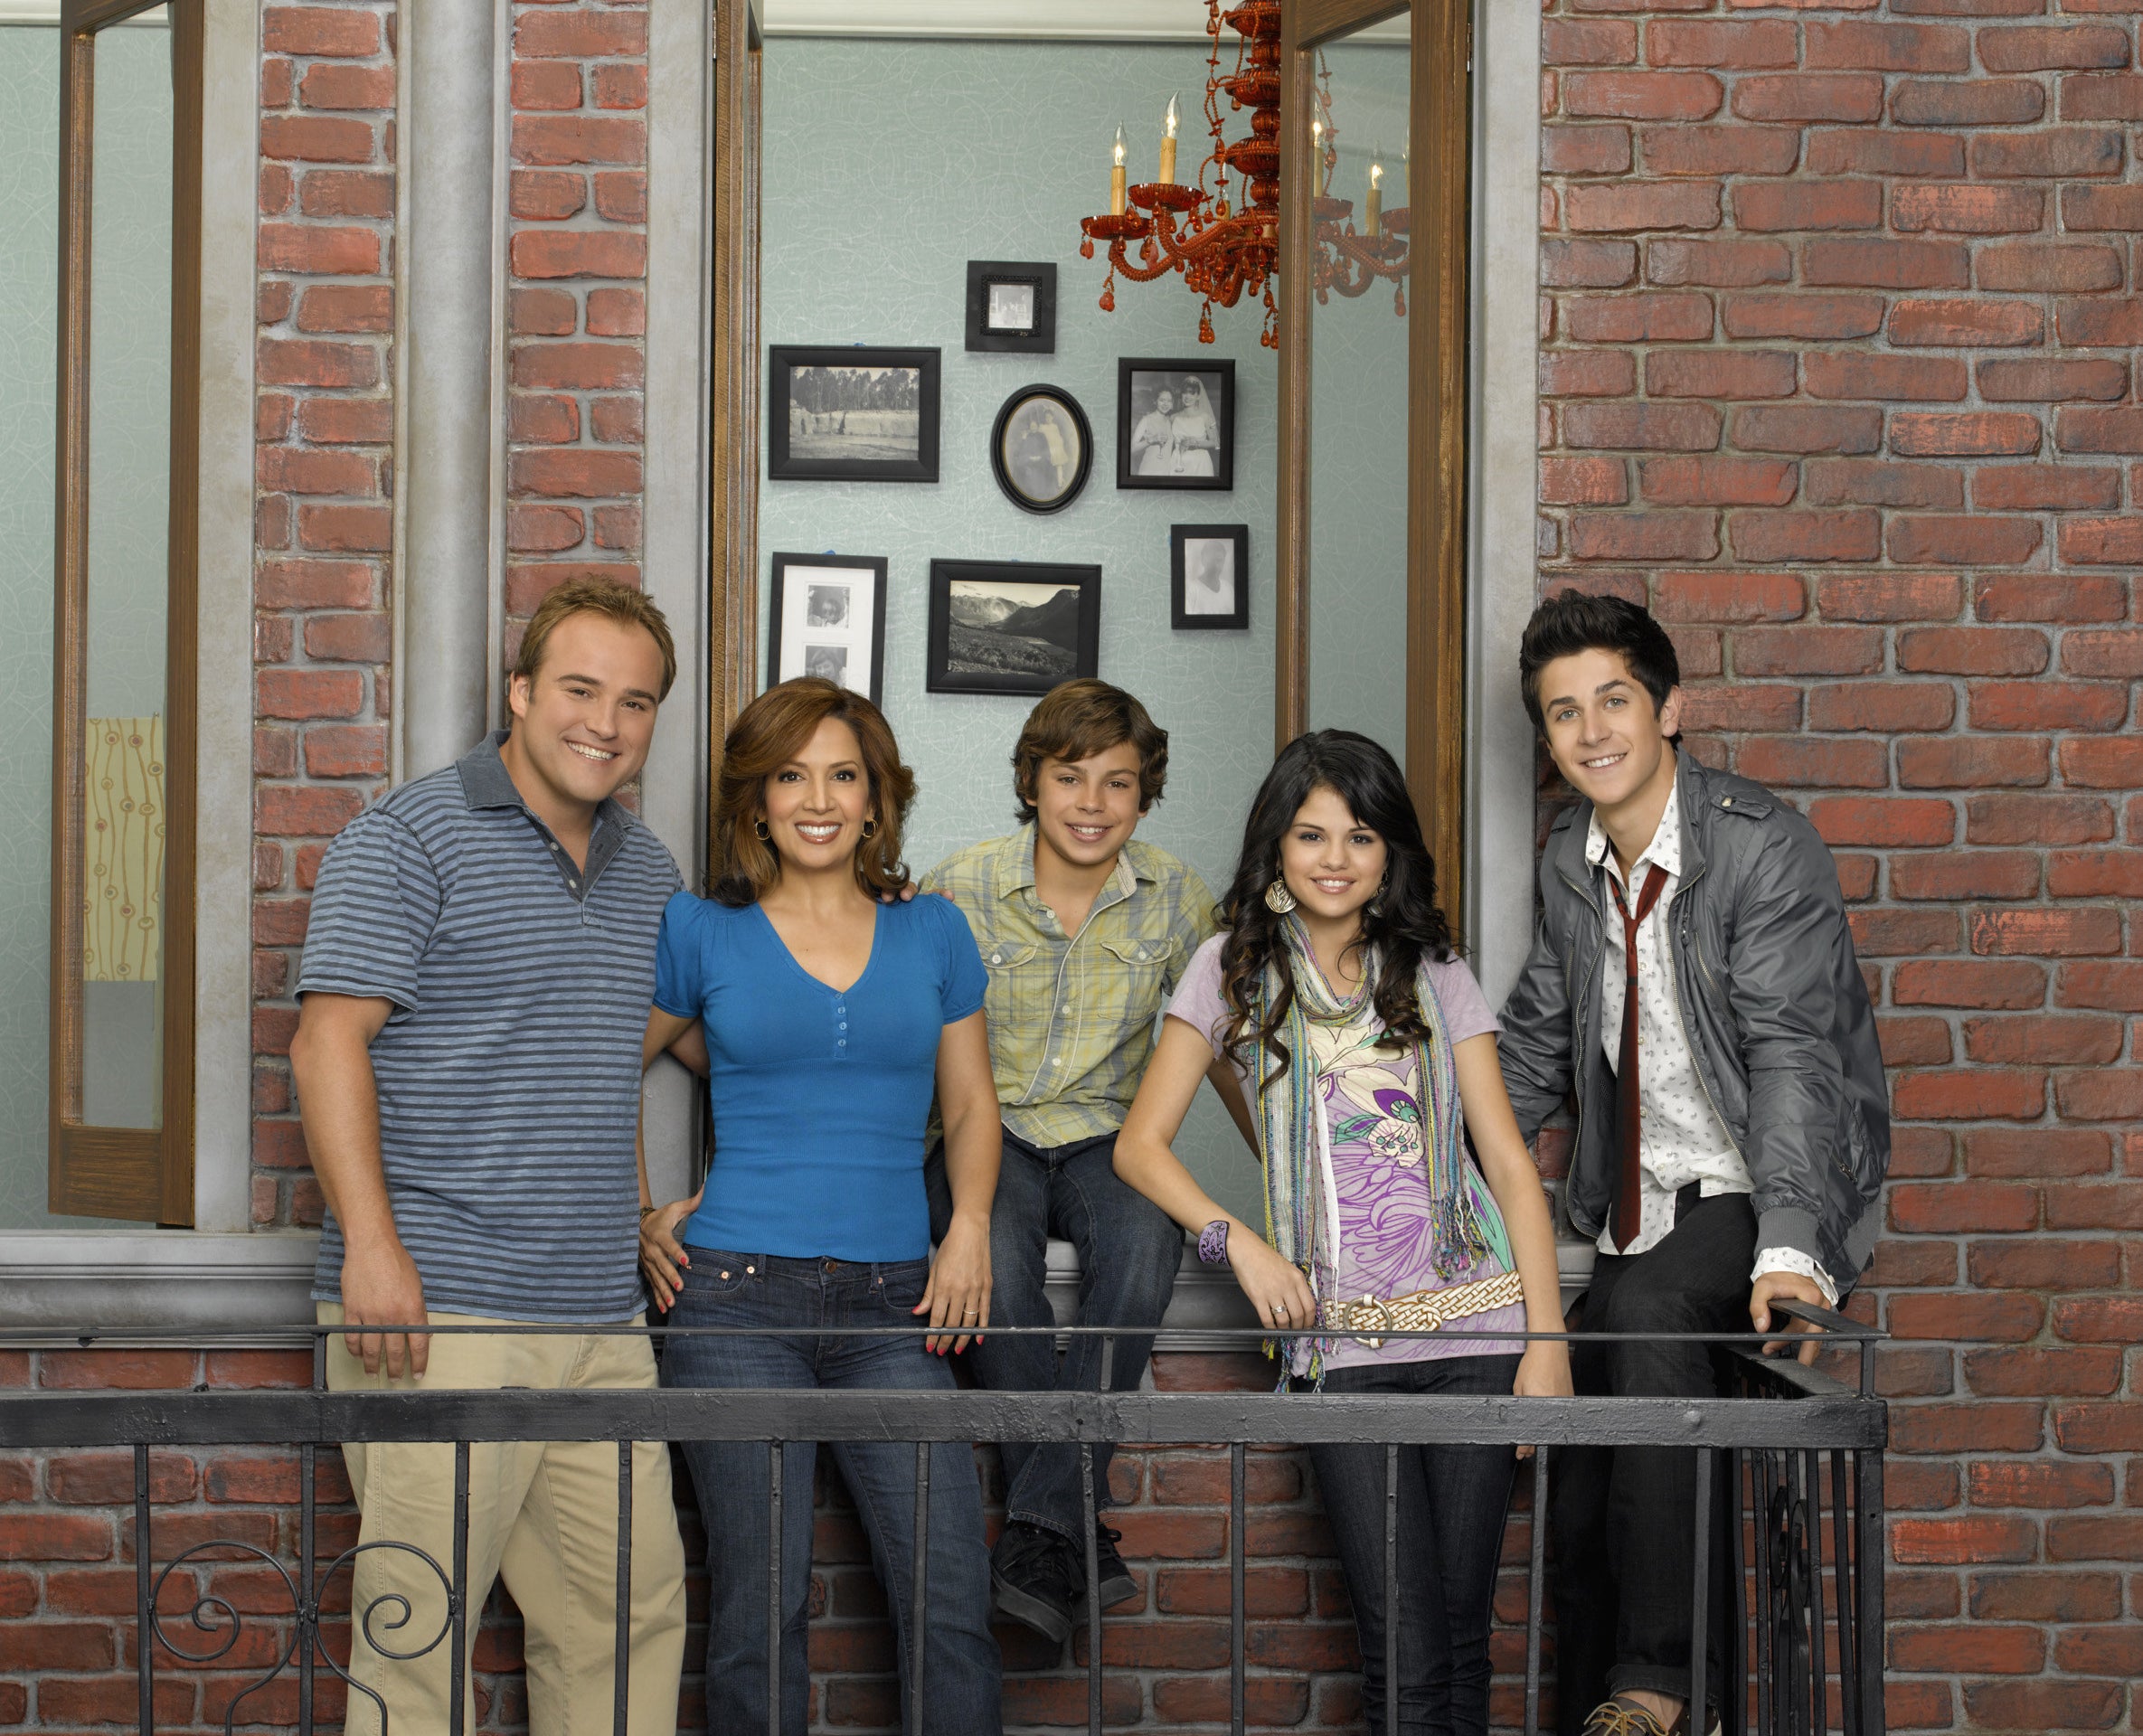 Mrs Russo Wizards Of Waverly Place Porn Mom - 48 Best Disney+TV Shows To Watch (May 2022)